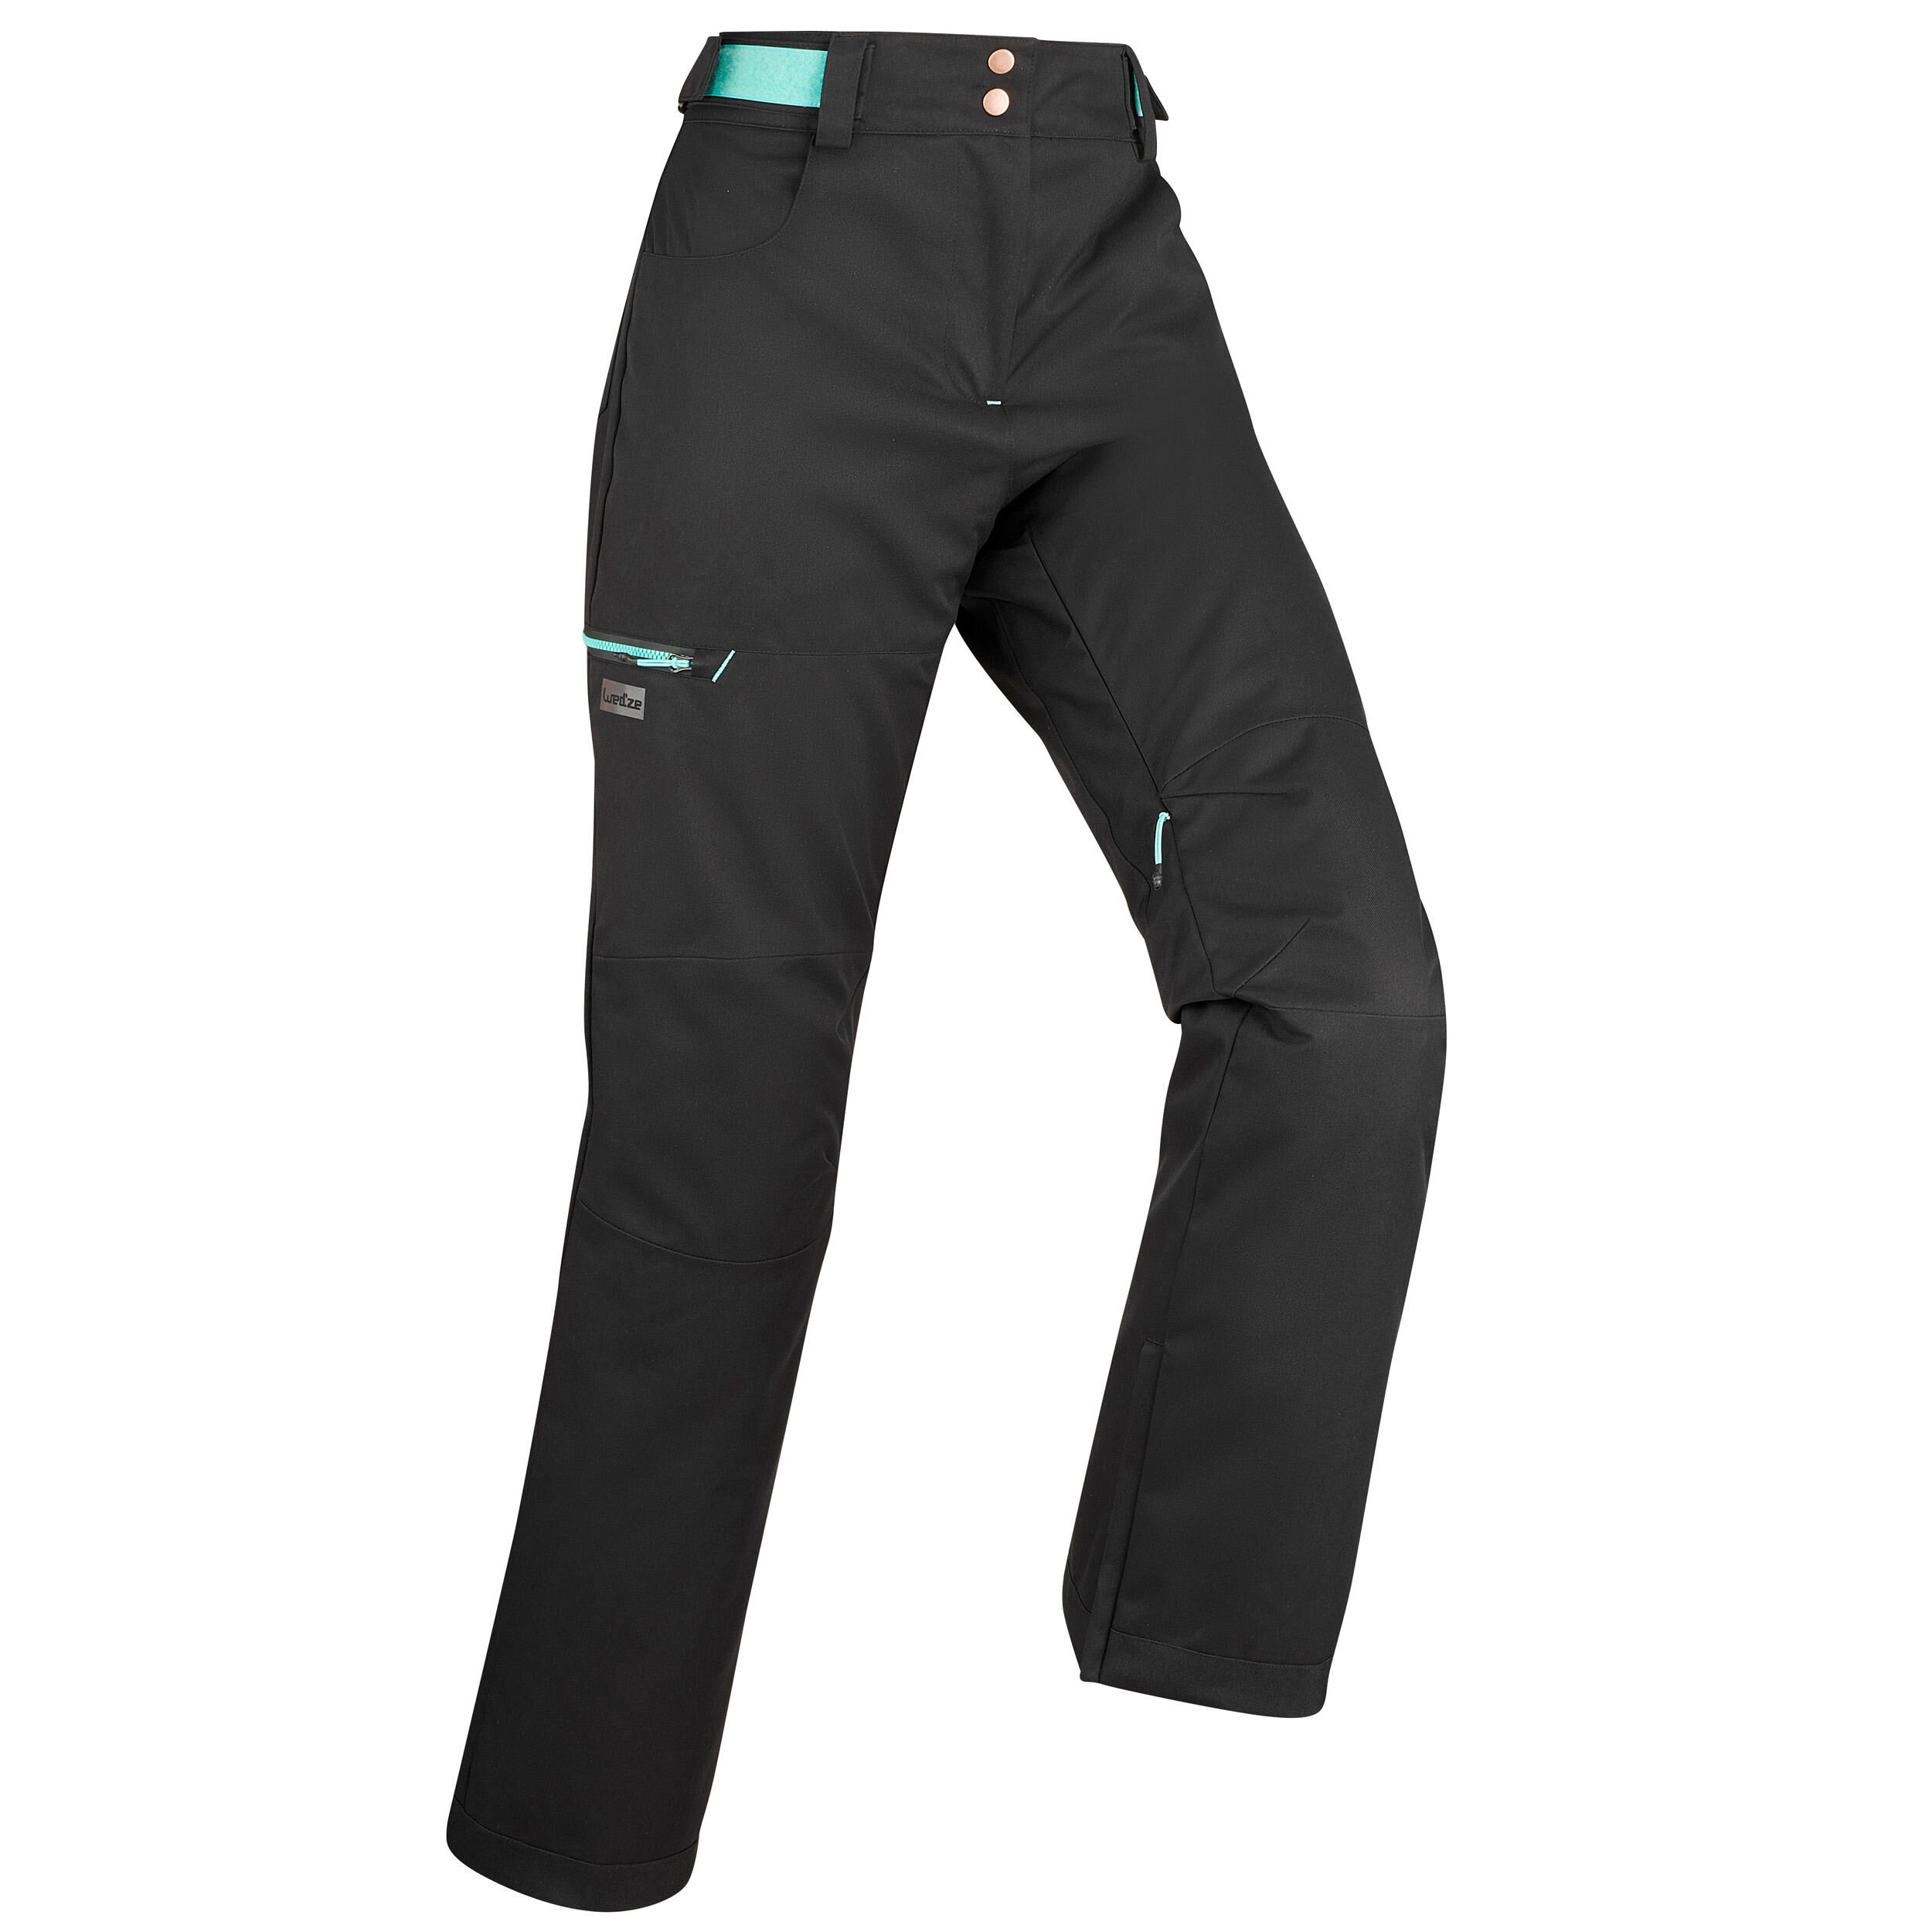 DREAMSCAPE Women's skiing and snowboarding trousers 500 - Black